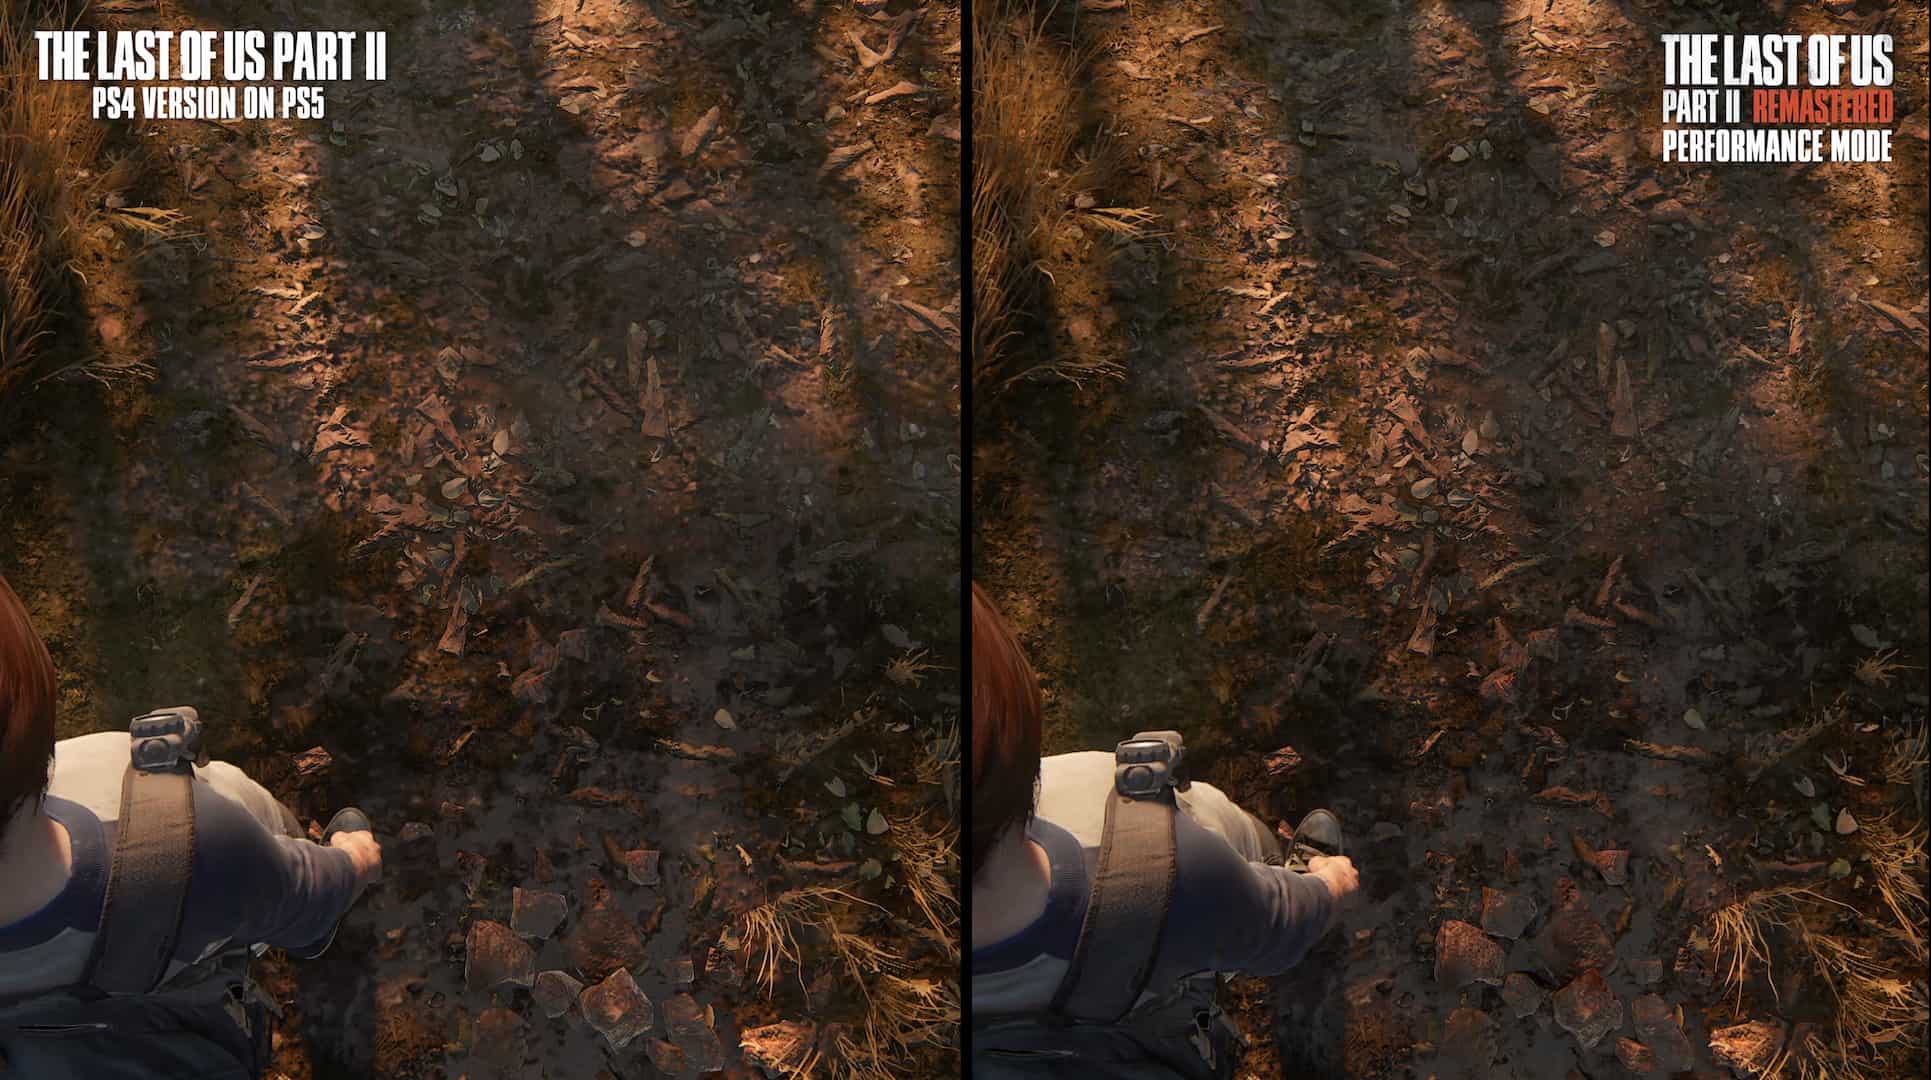 The Last of us 2 Remastered PS4 vs PS5